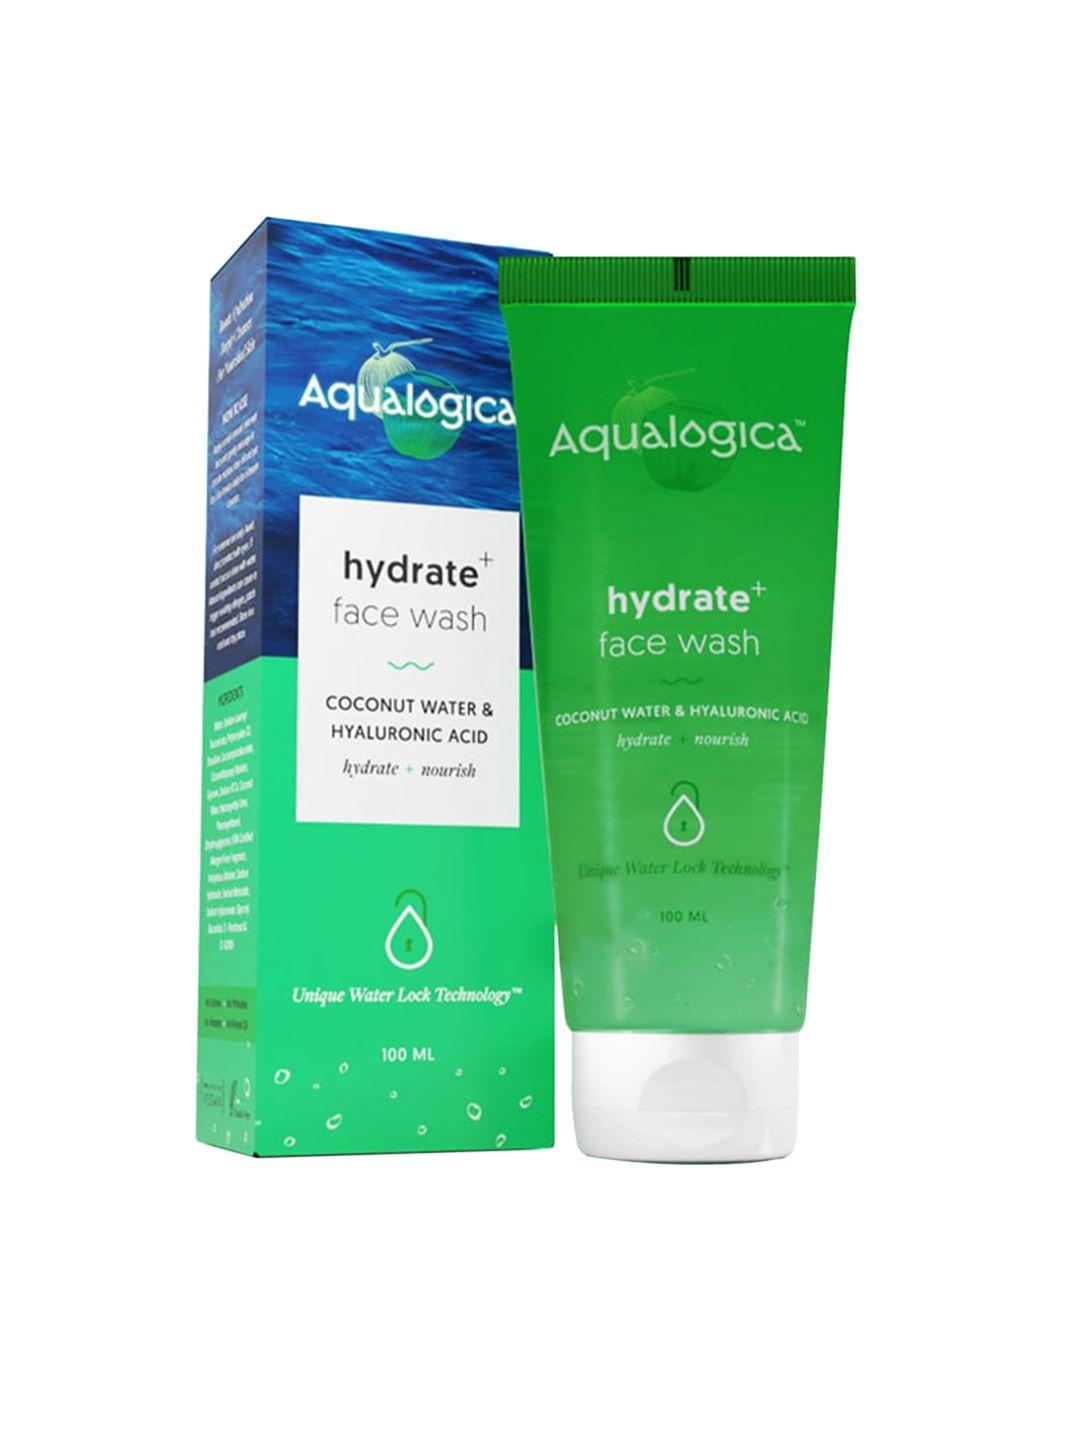 aqualogica hydrate+ face wash with coconut water & hyaluronic acid 100 ml